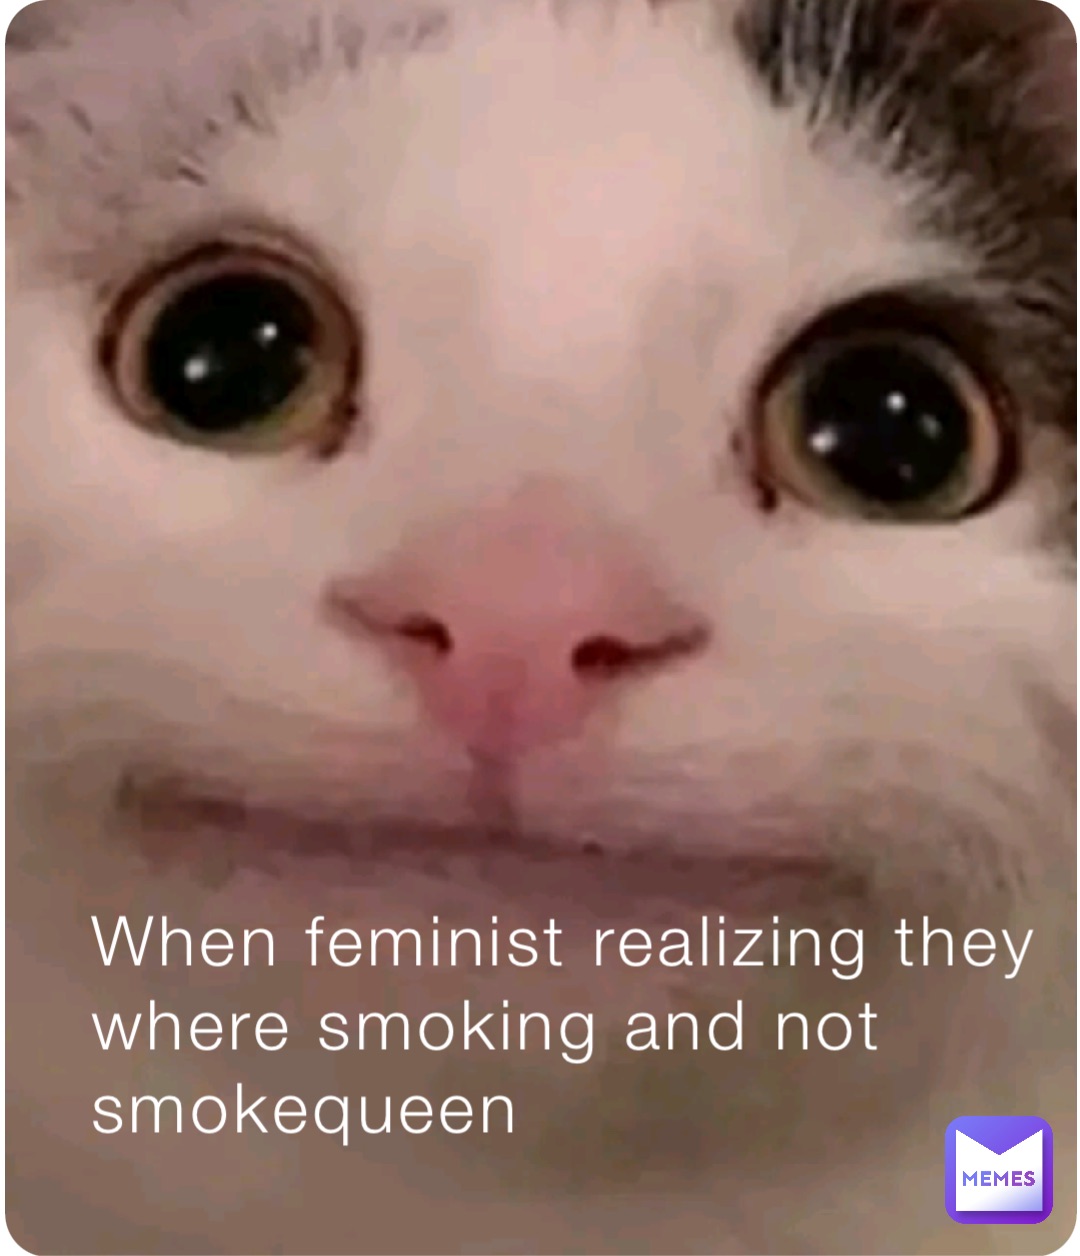 When feminist realizing they where smoking and not smokequeen